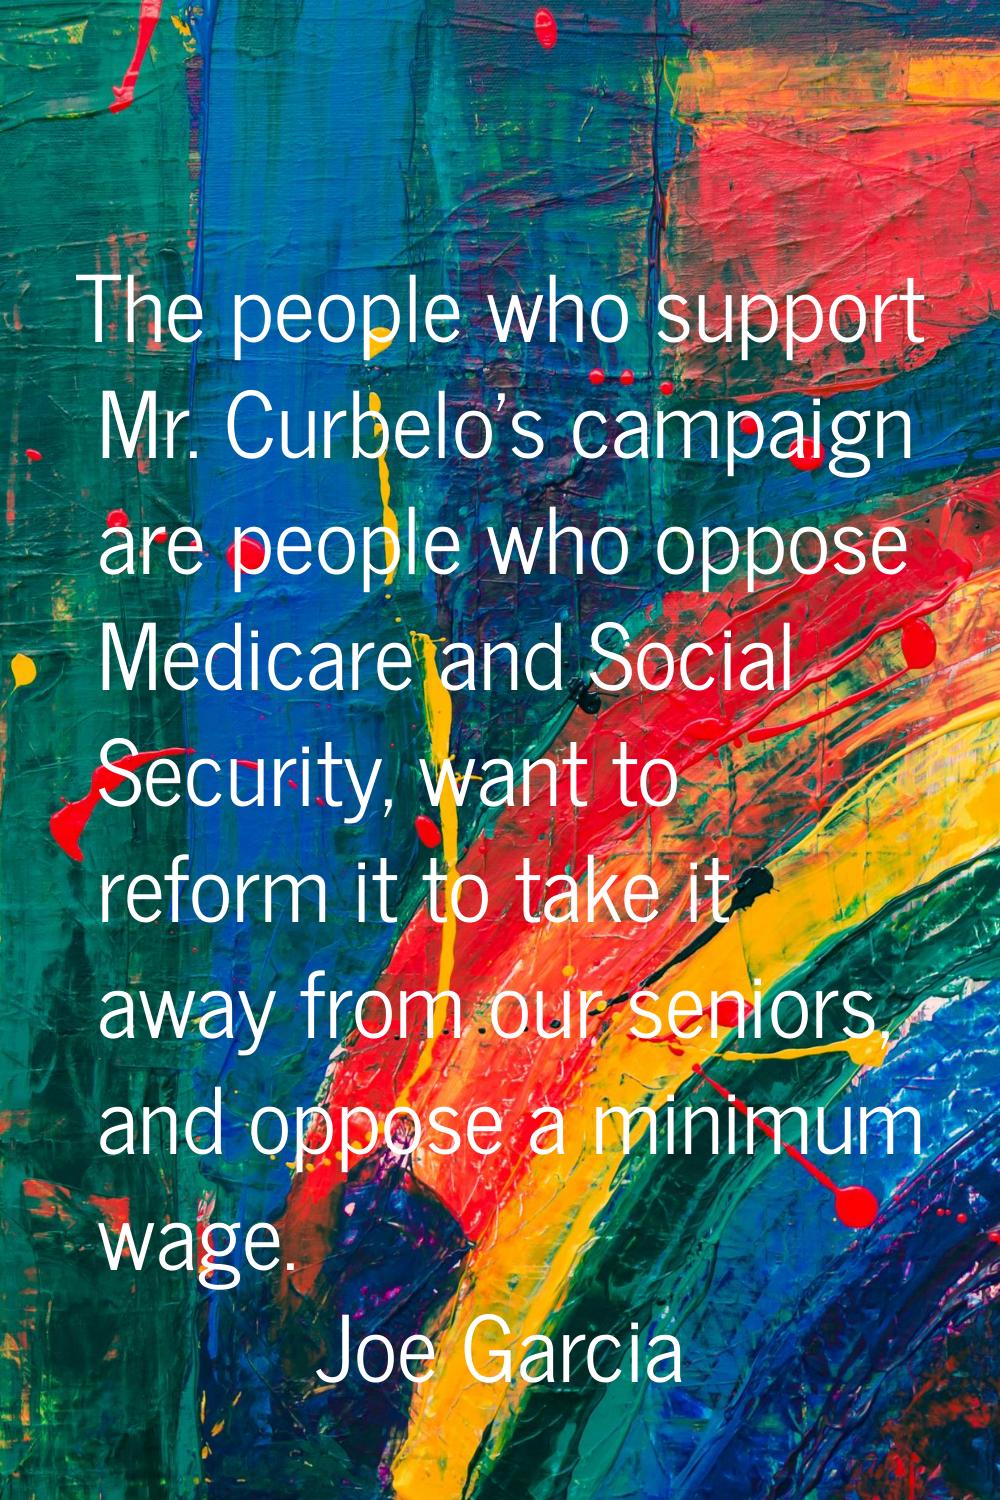 The people who support Mr. Curbelo's campaign are people who oppose Medicare and Social Security, w